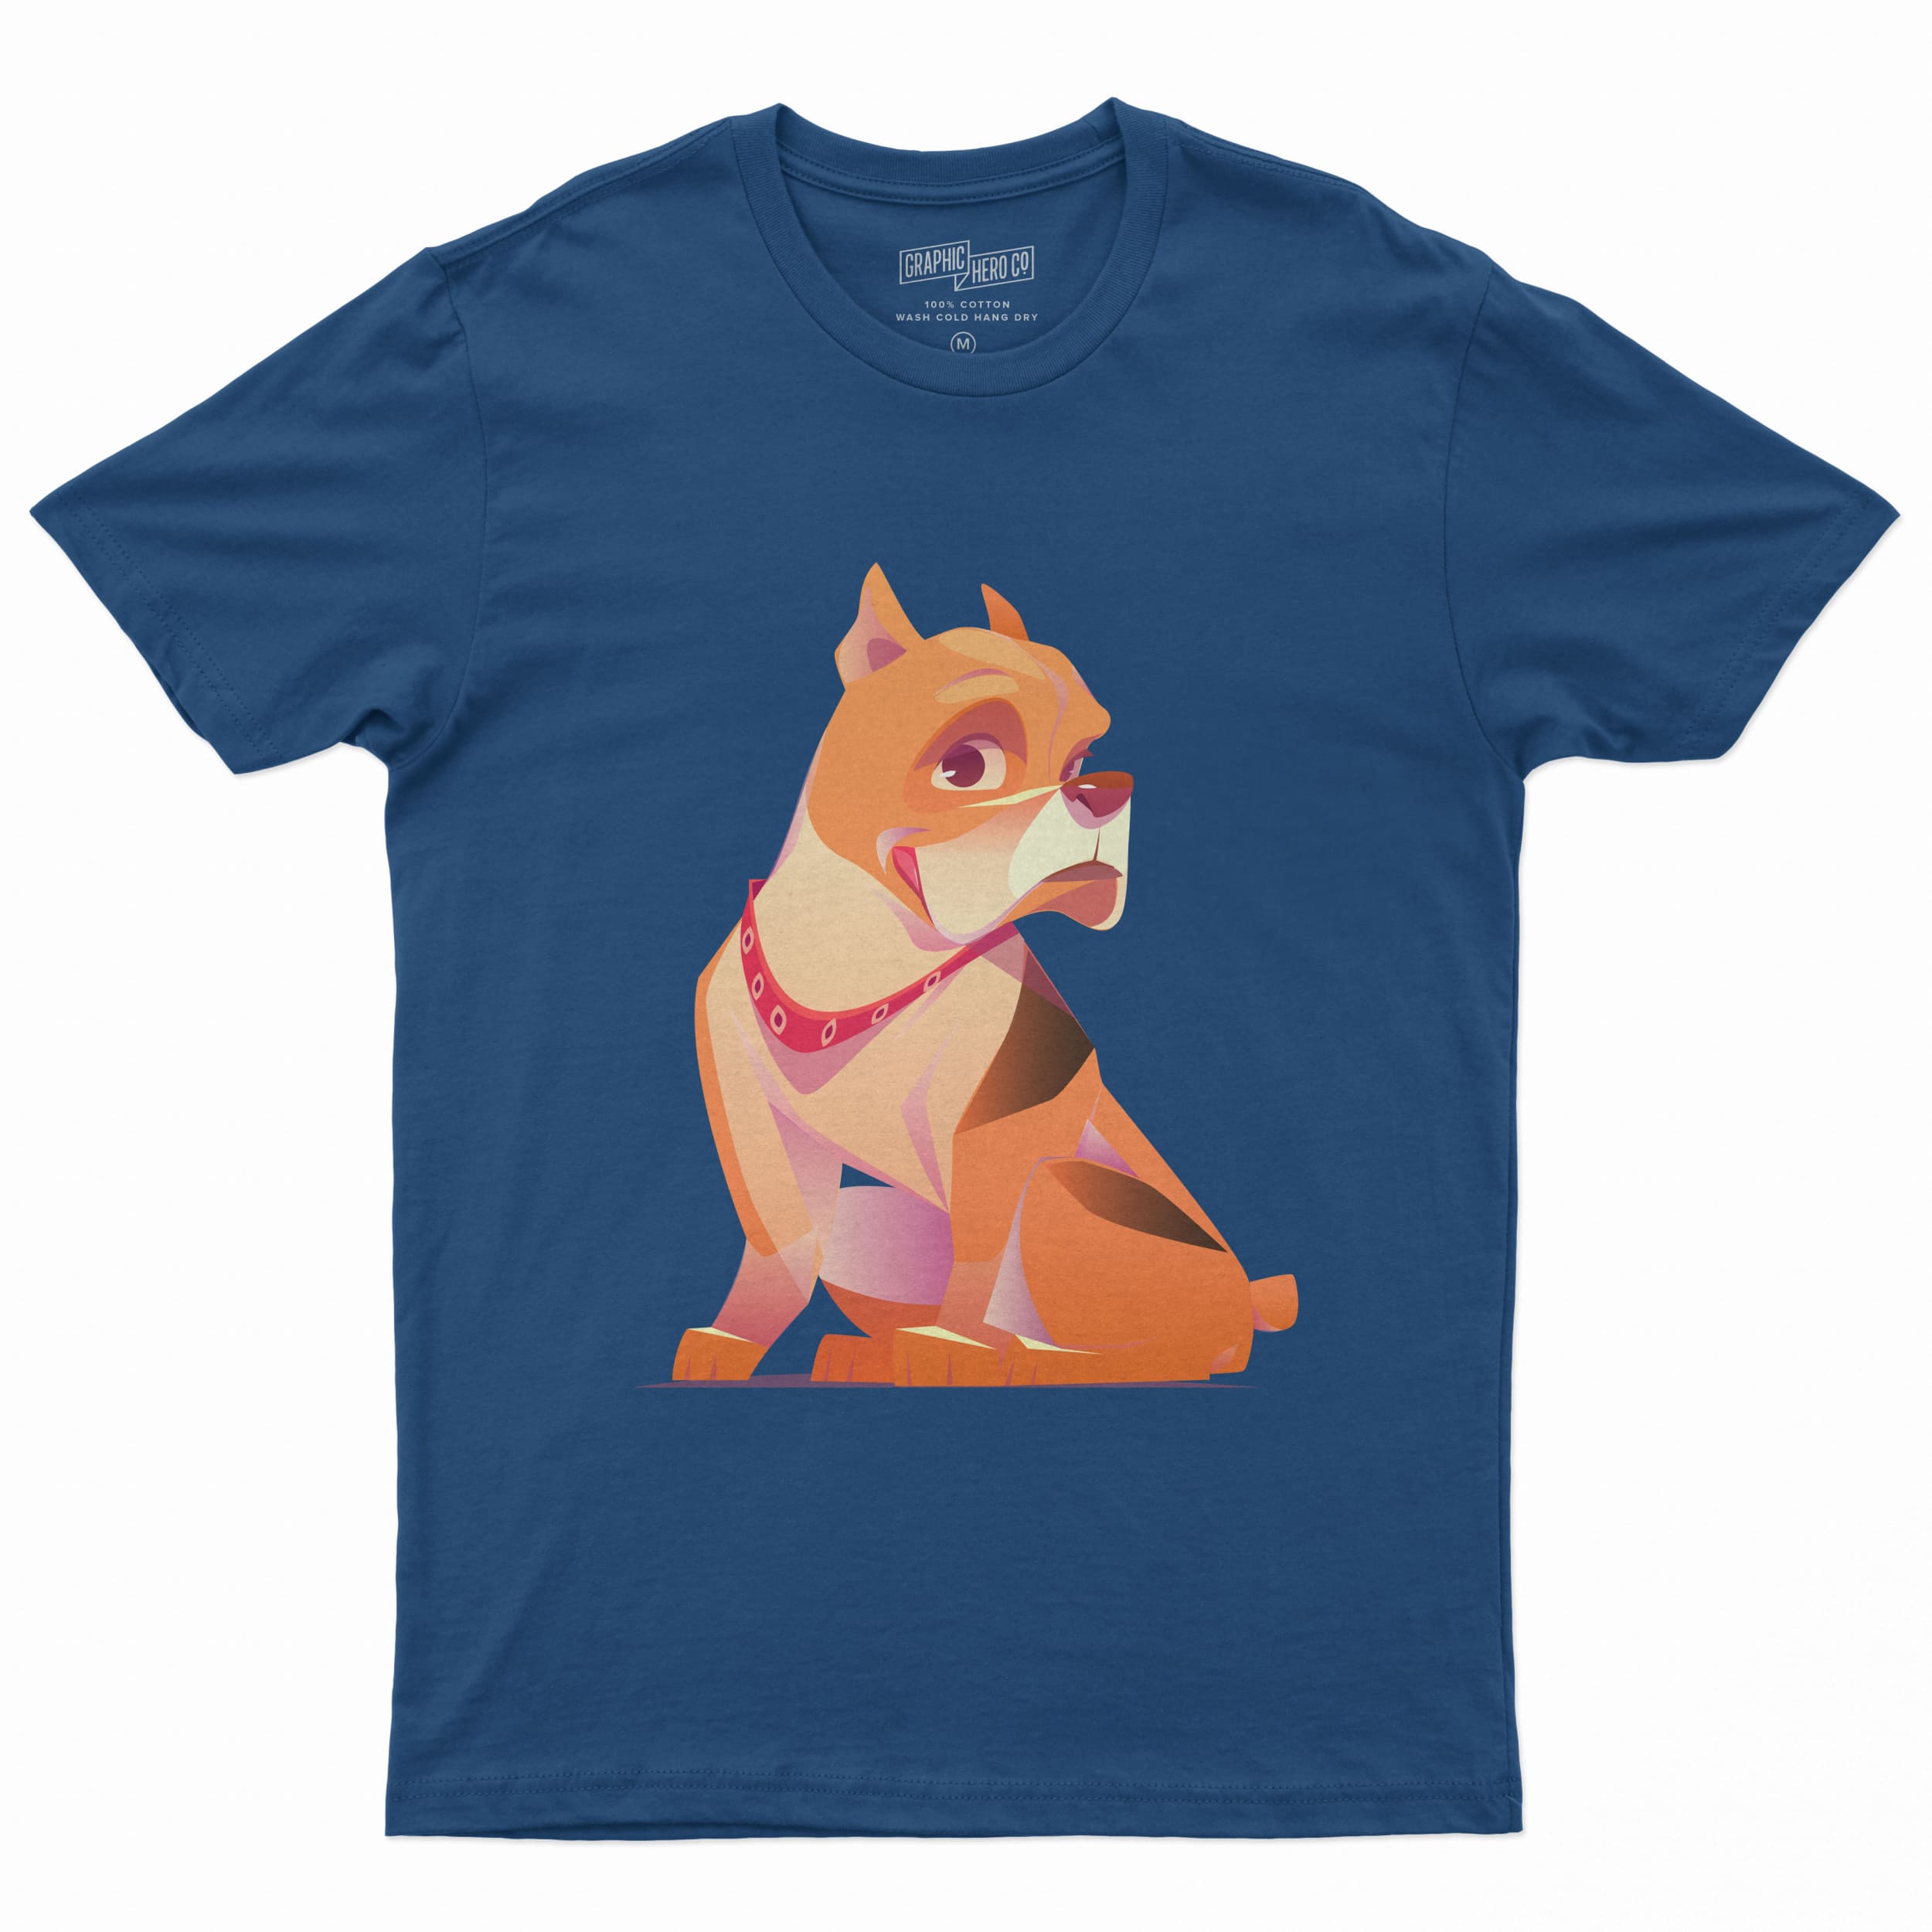 Dark blue t-shirt with a red pitbull on a white background.